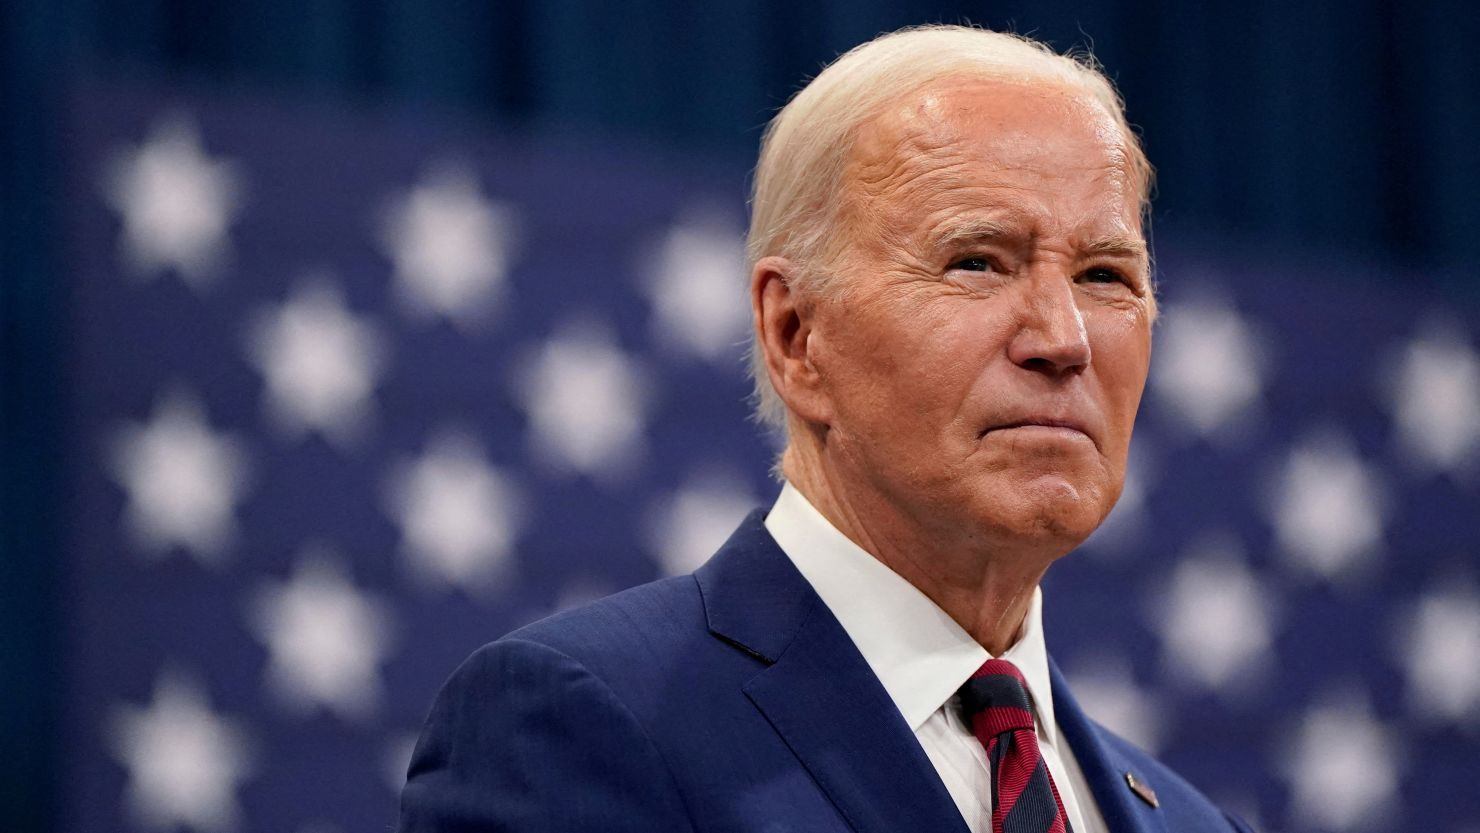 Biden says he hears voices of protesters in solidarity with Palestine